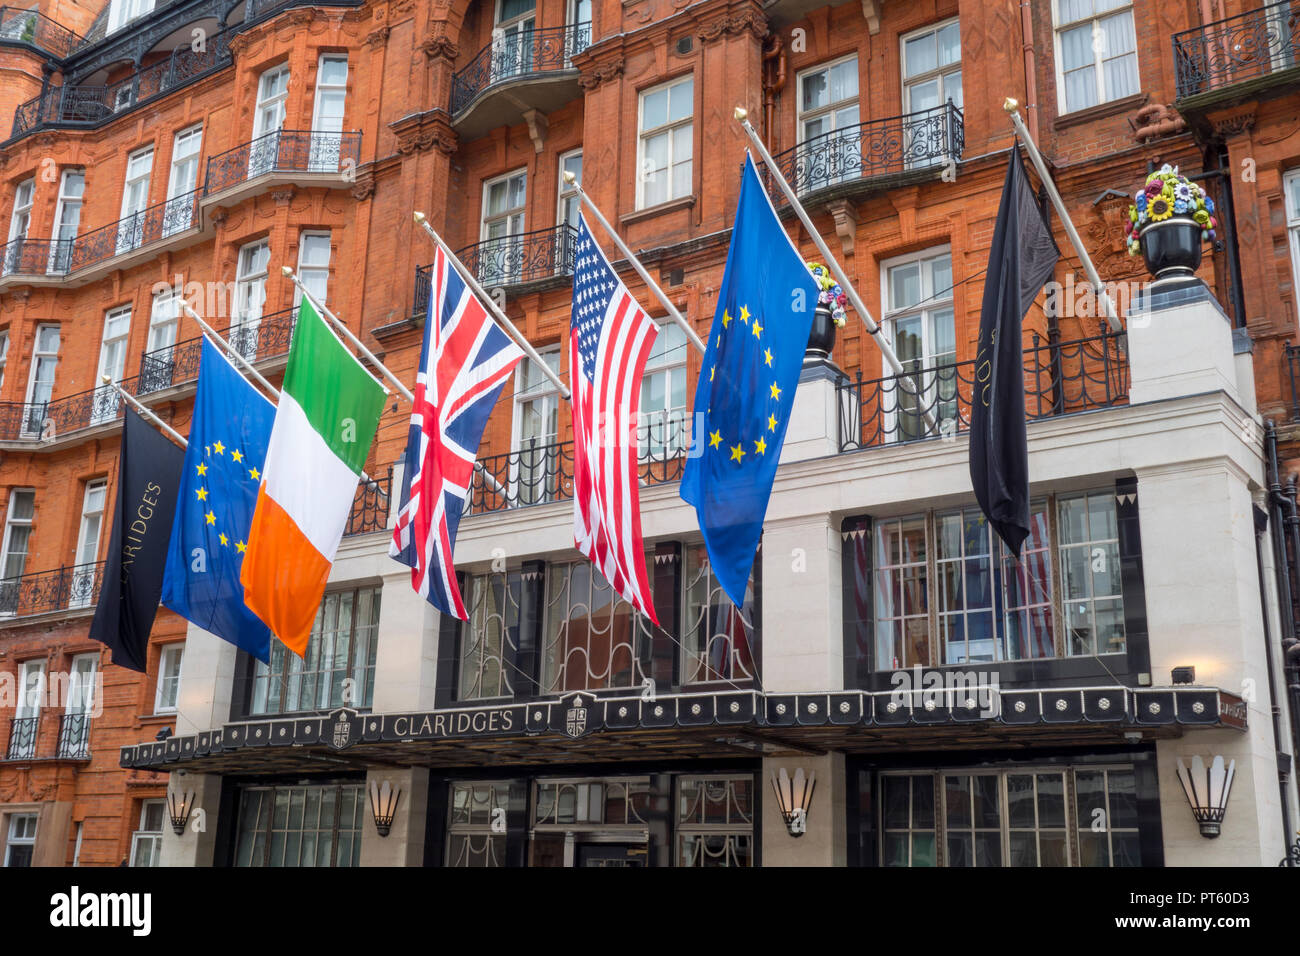 International flags outside the entrance and facade to Claridges hotel building, Mayfair, Westminster, London, UK Stock Photo